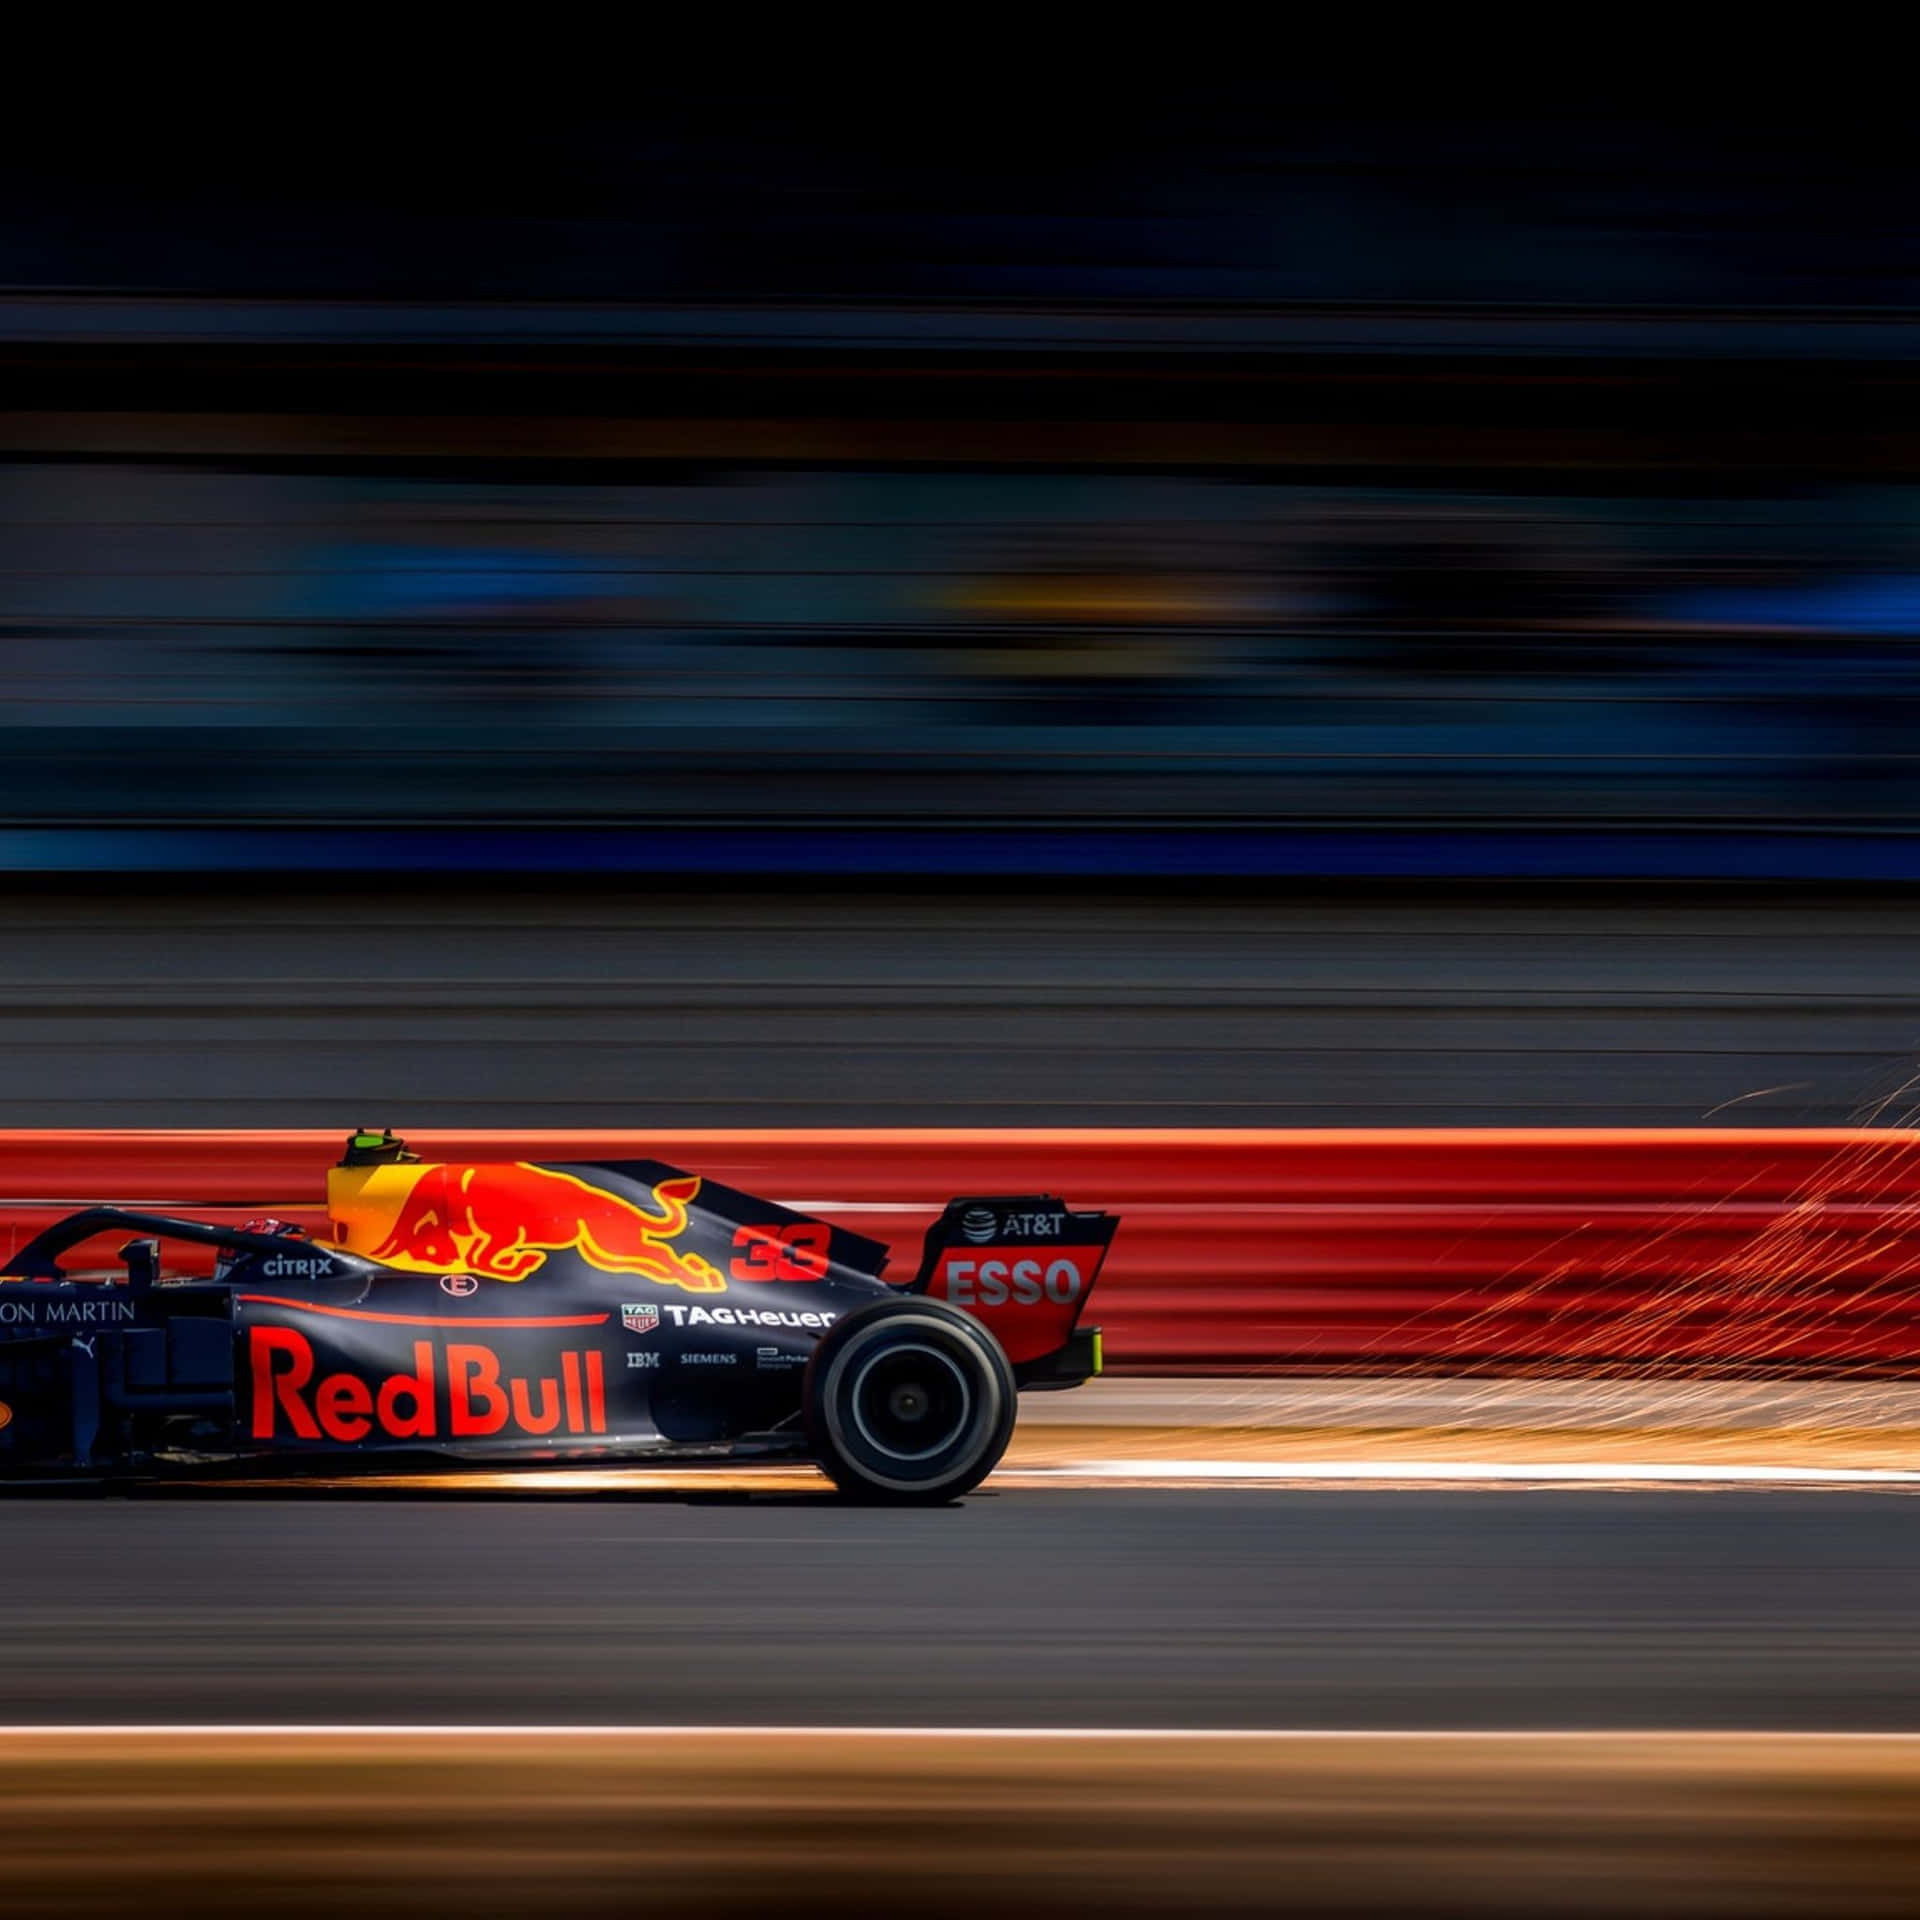 Max Verstappen in action at an F1 race